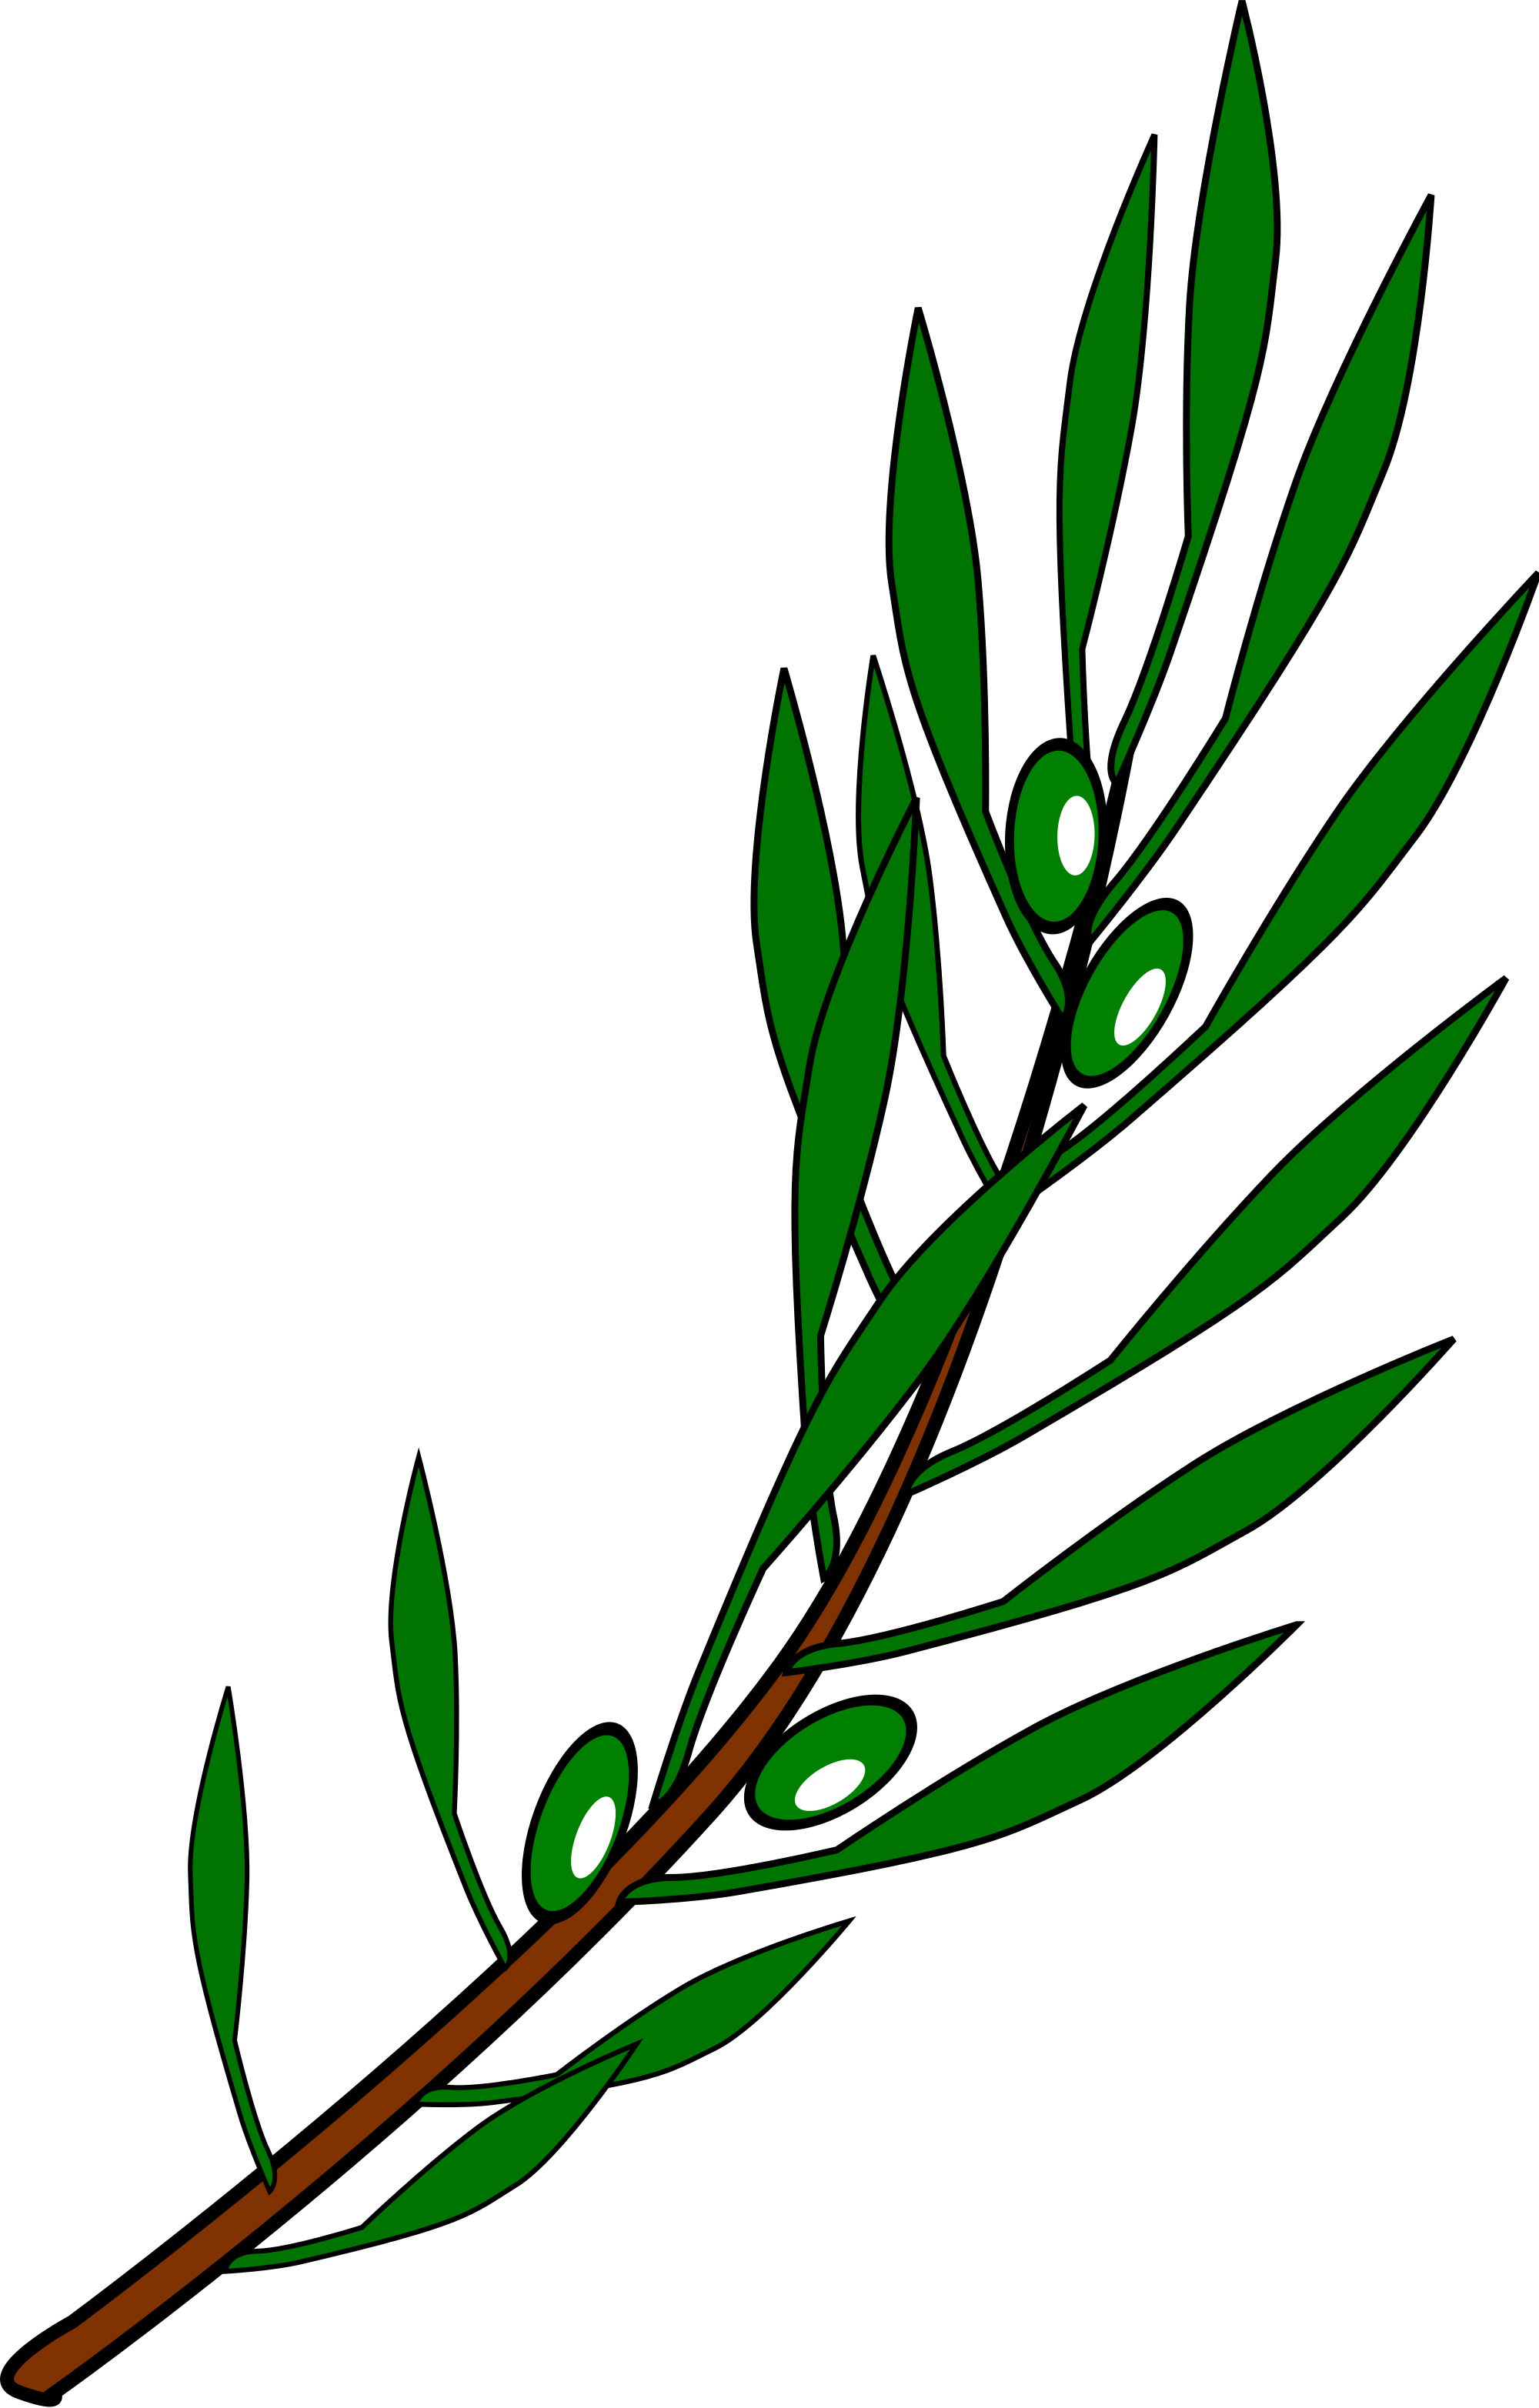 Drawing at getdrawings com. Pigeon clipart olive branch